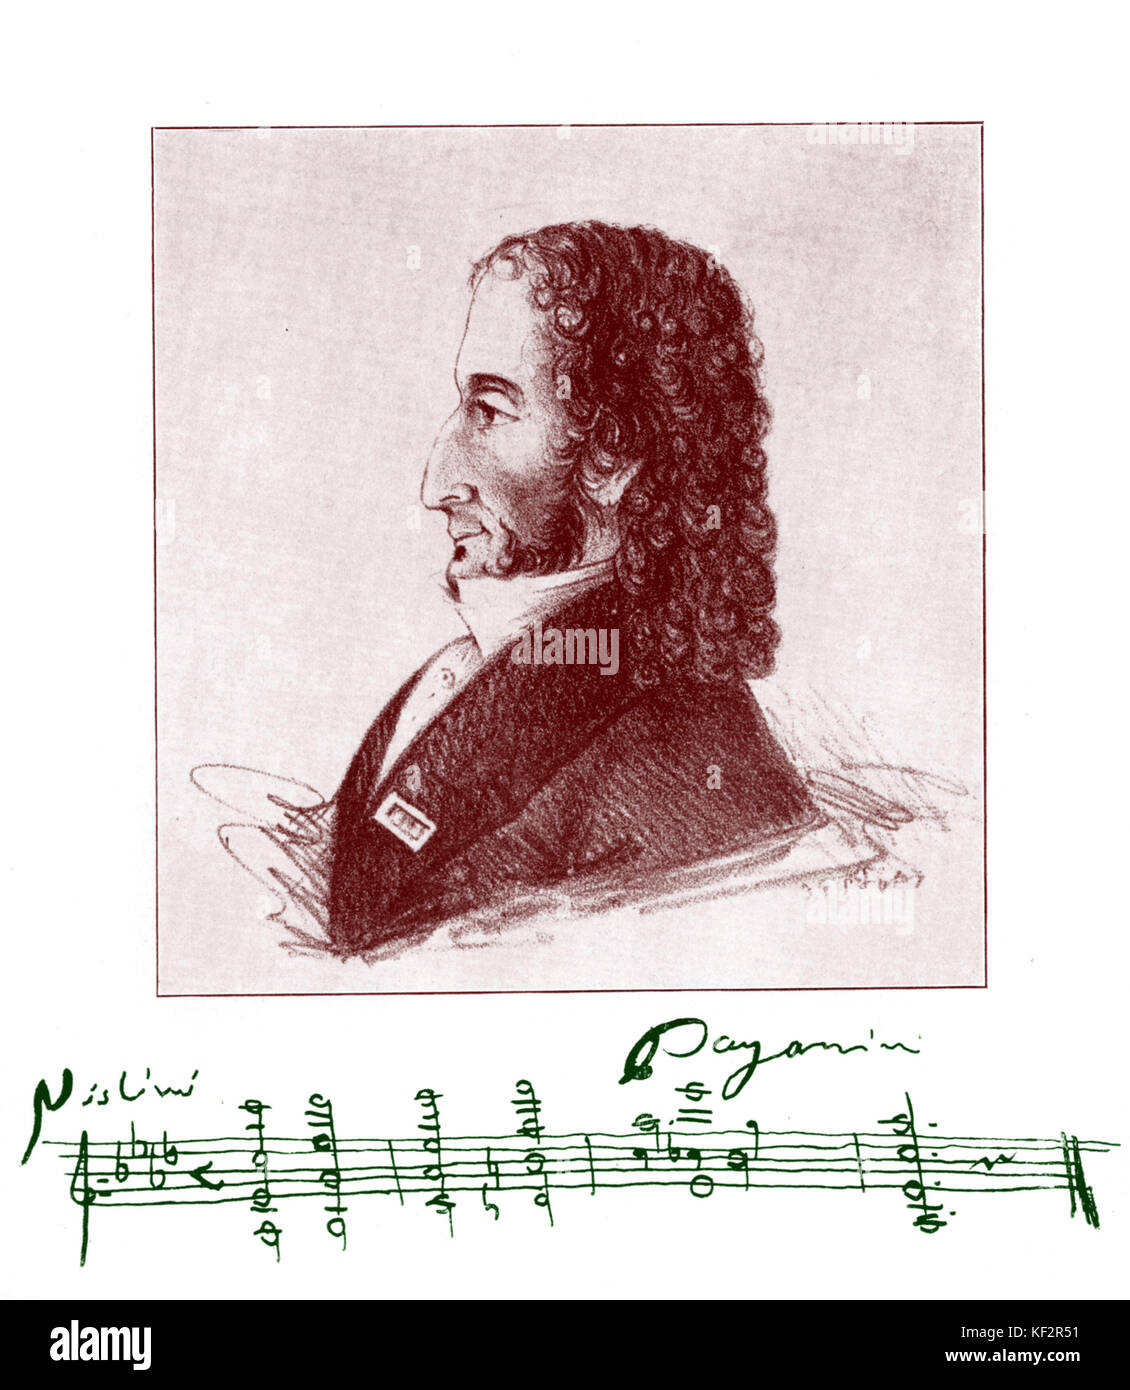 PAGANINI, Niccolo, caricature of head and autograph score. Italian violinist and composer 27 October 1782 - 27 May 1840. Stock Photo